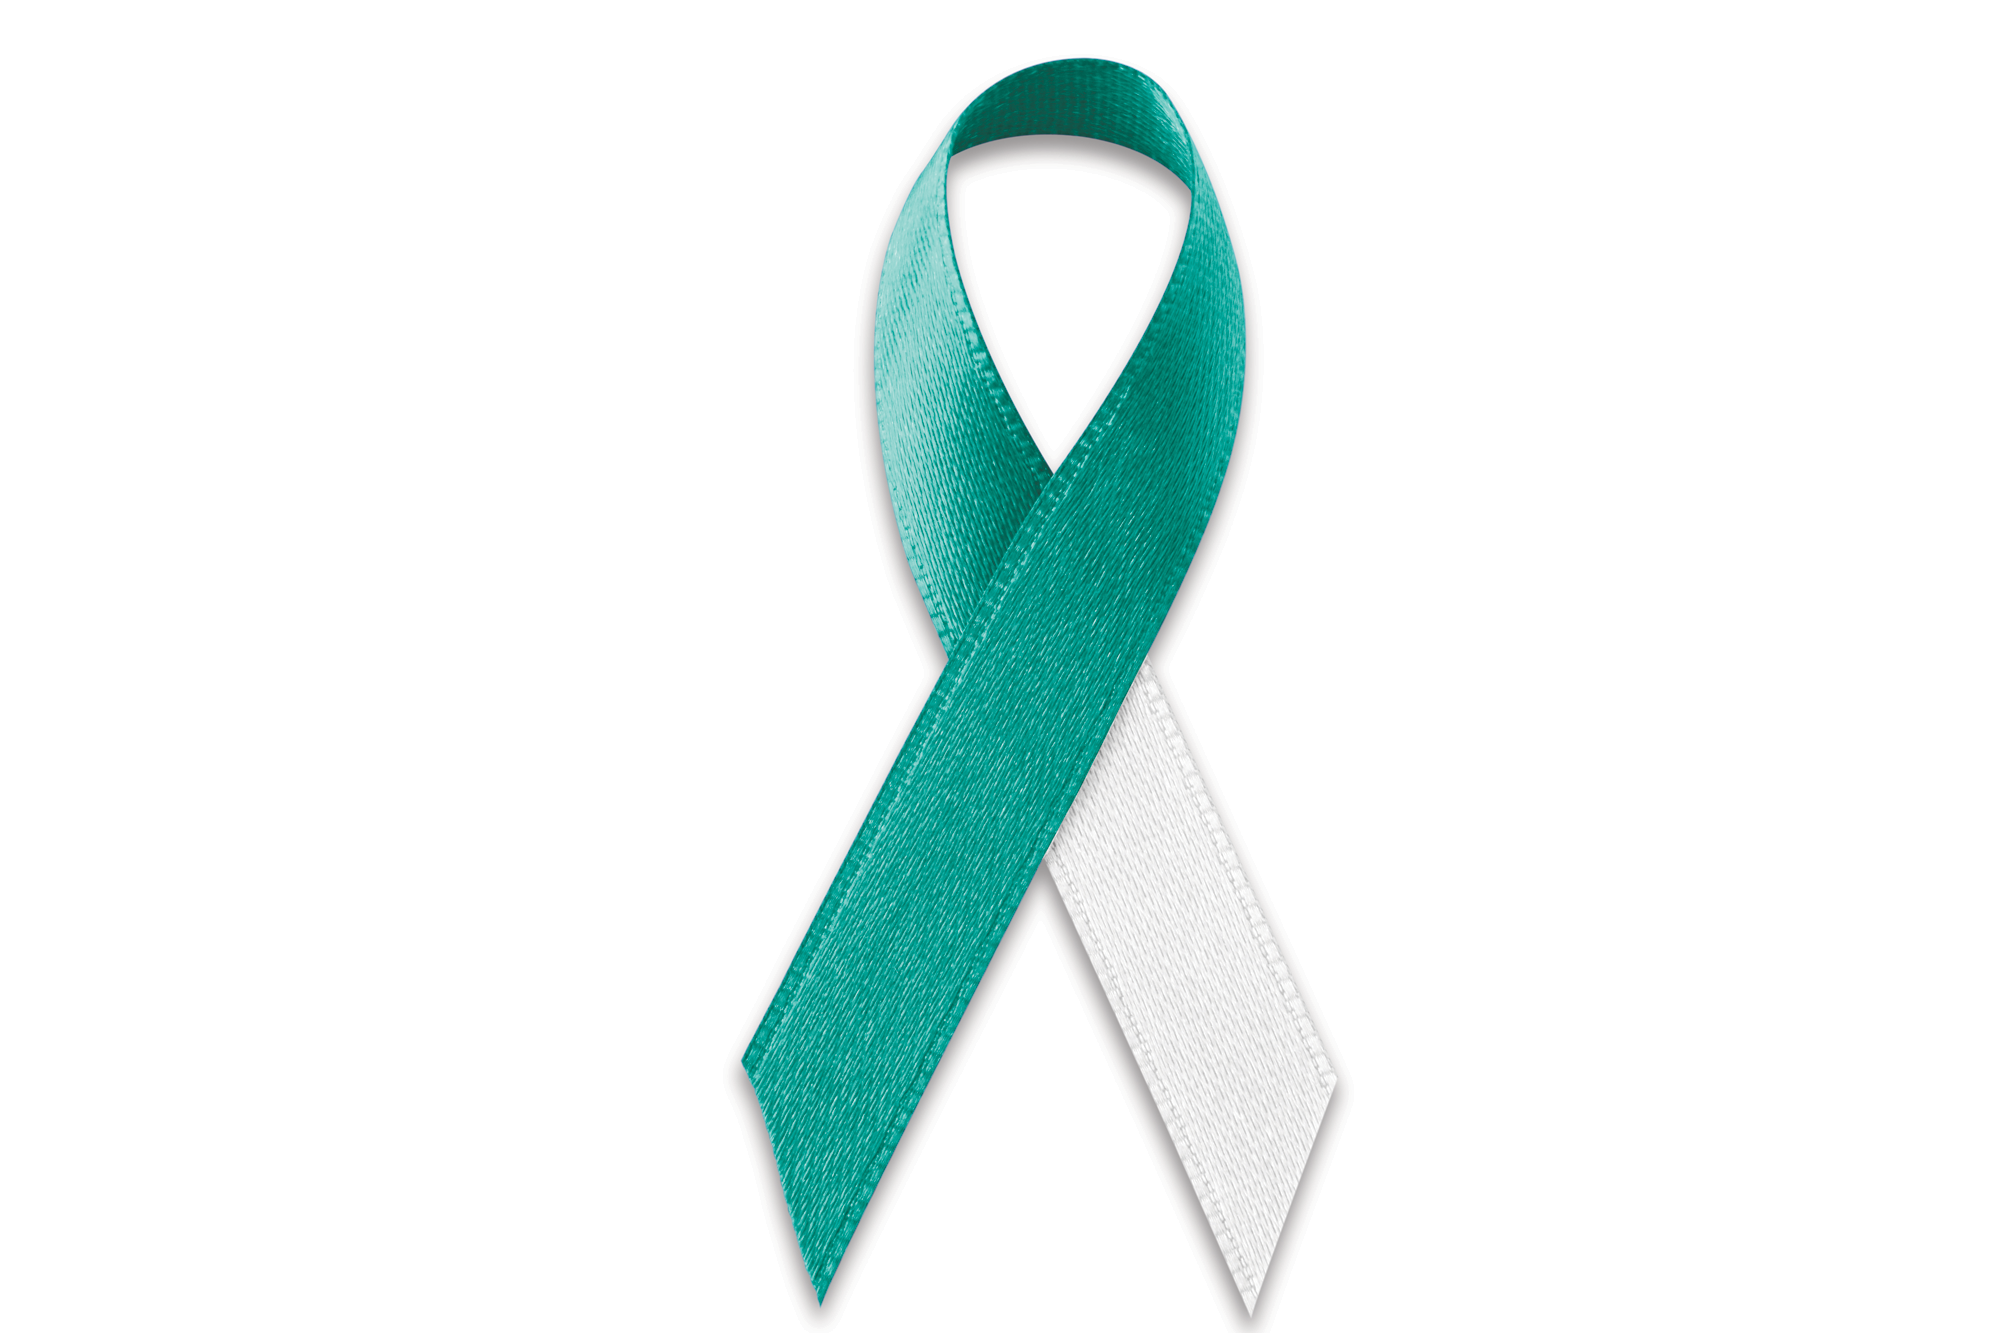 Over 62 thousand women died of cervical cancer in 2015-16